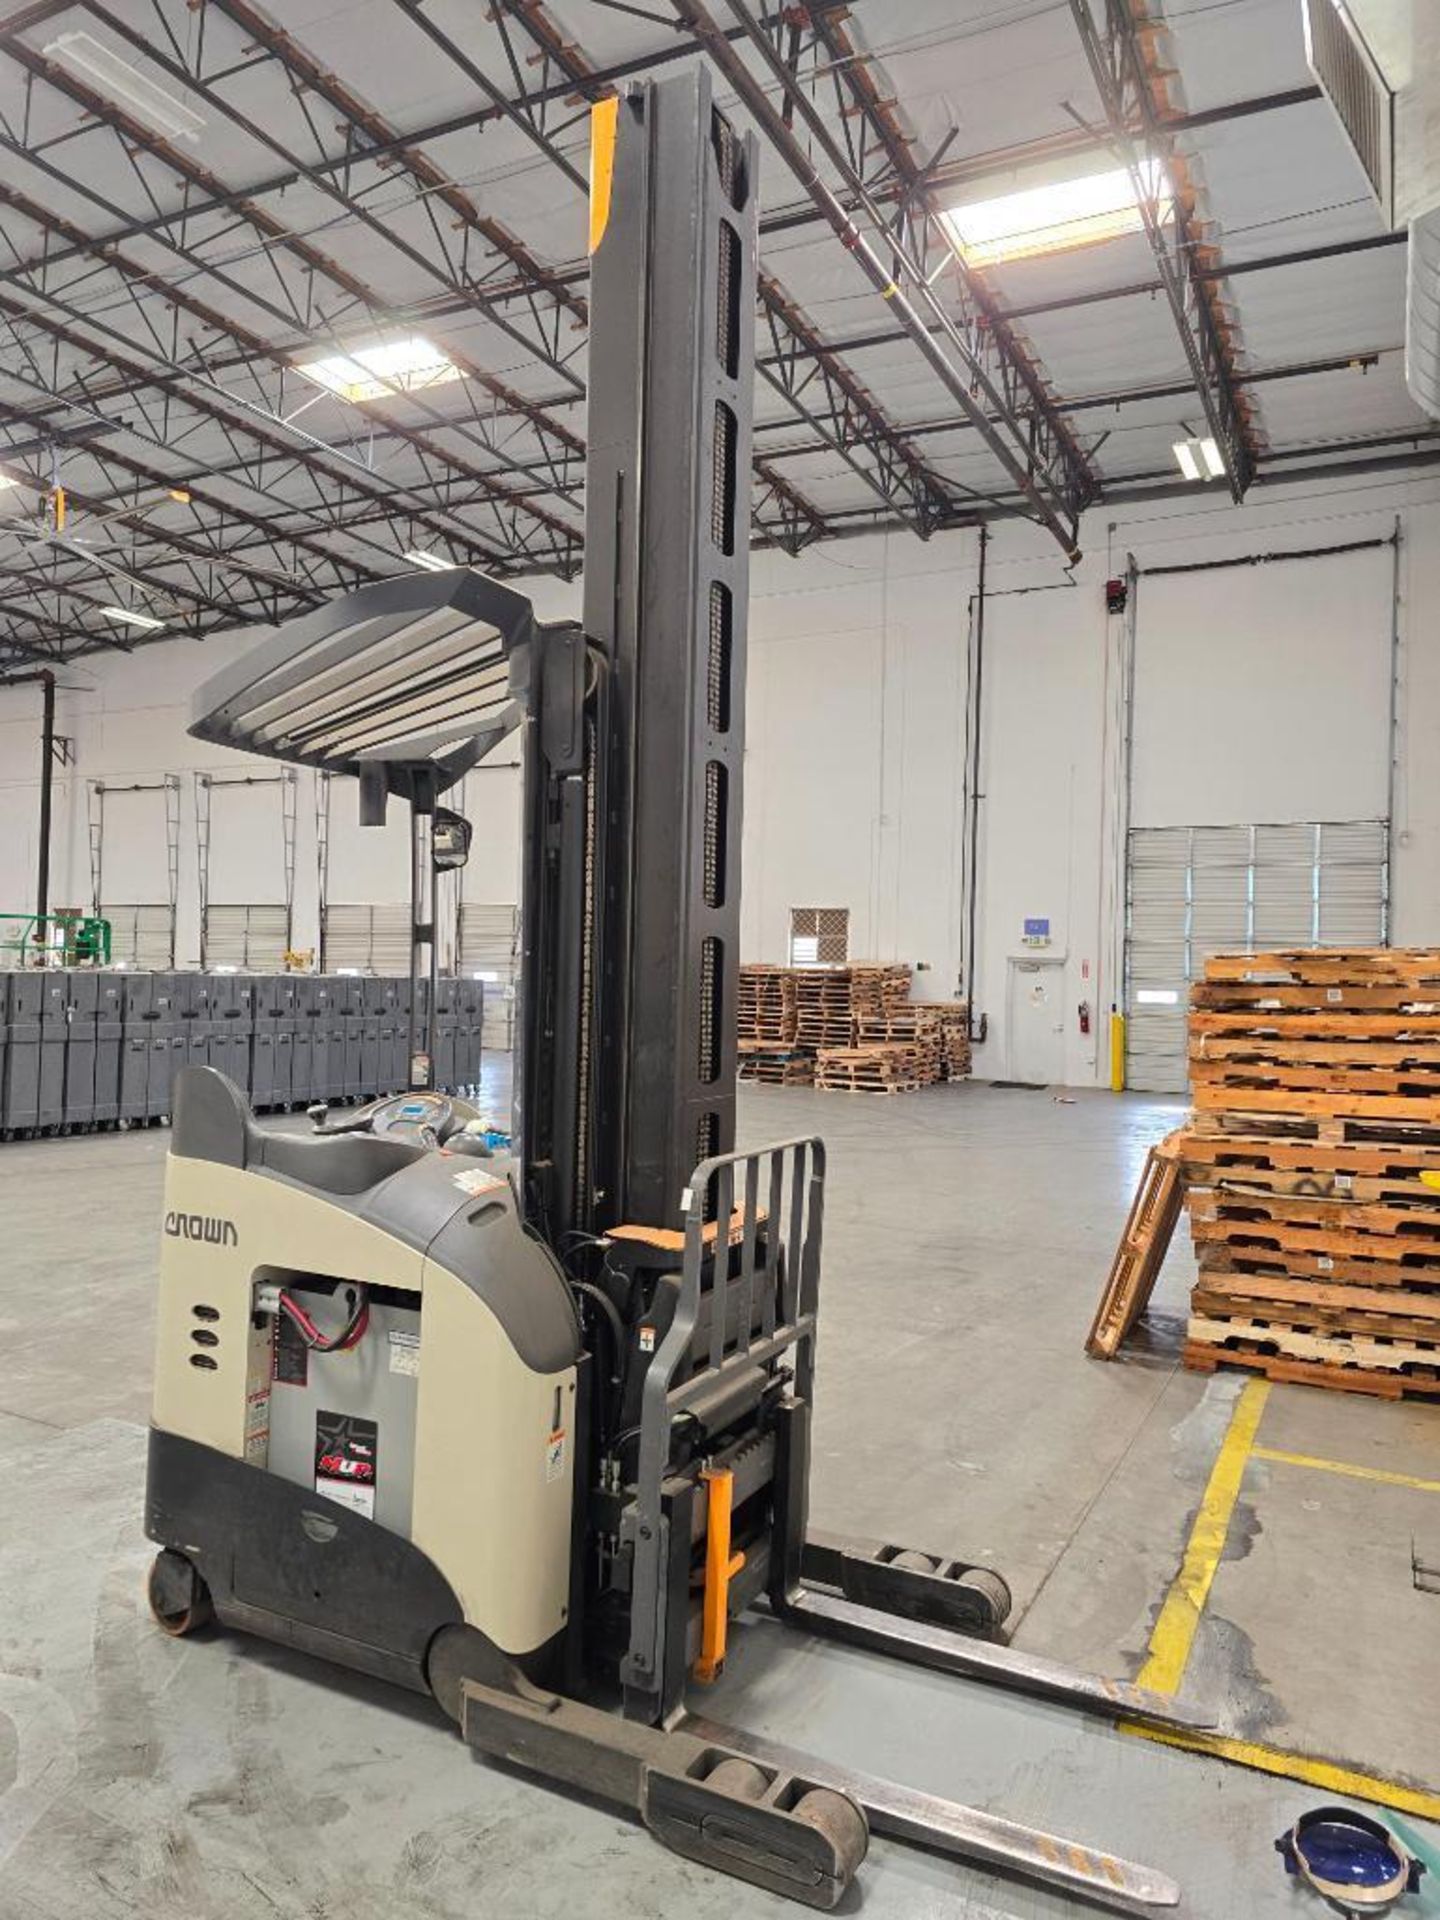 2017 Crown Monomast 4,500-LB. Capacity Reach Truck, Model: RM 6000 Series, 36-Volts, S/N: 1A486193, - Image 3 of 15